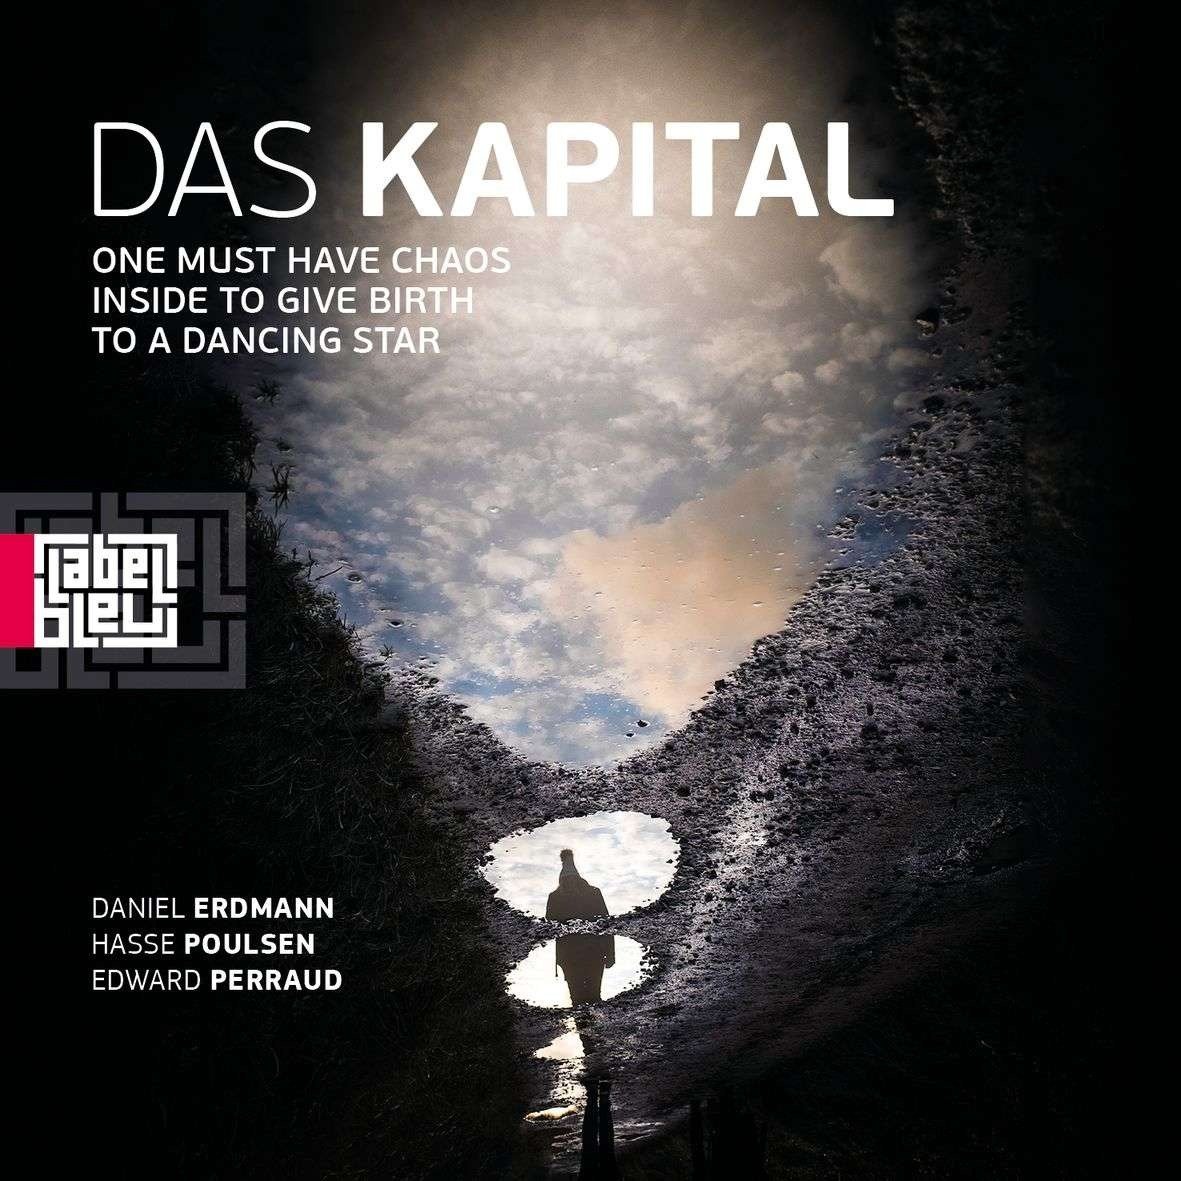 CD Shop - DAS KAPITAL ONE MUST HAVE CHAOS INSIDE TO GIVE BIRTH TO A DANCING STAR